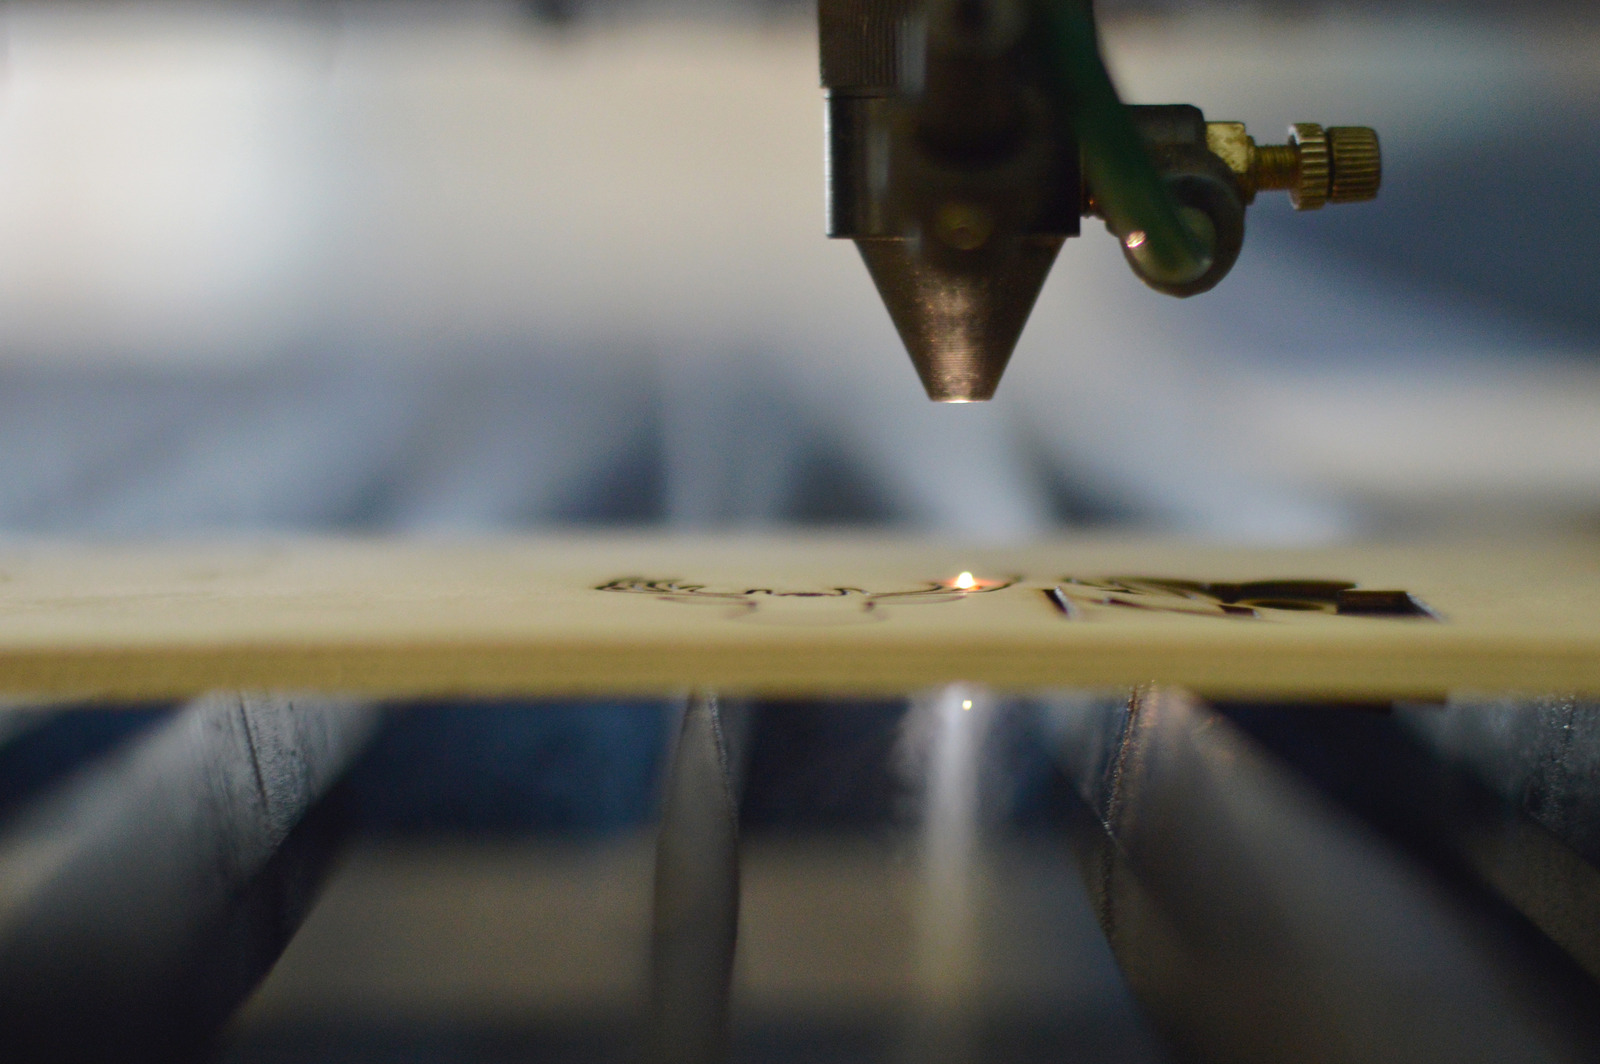 Analyzing the Benefits of Utilizing Automation to Fine-Tune Laser Cutting Tolerances